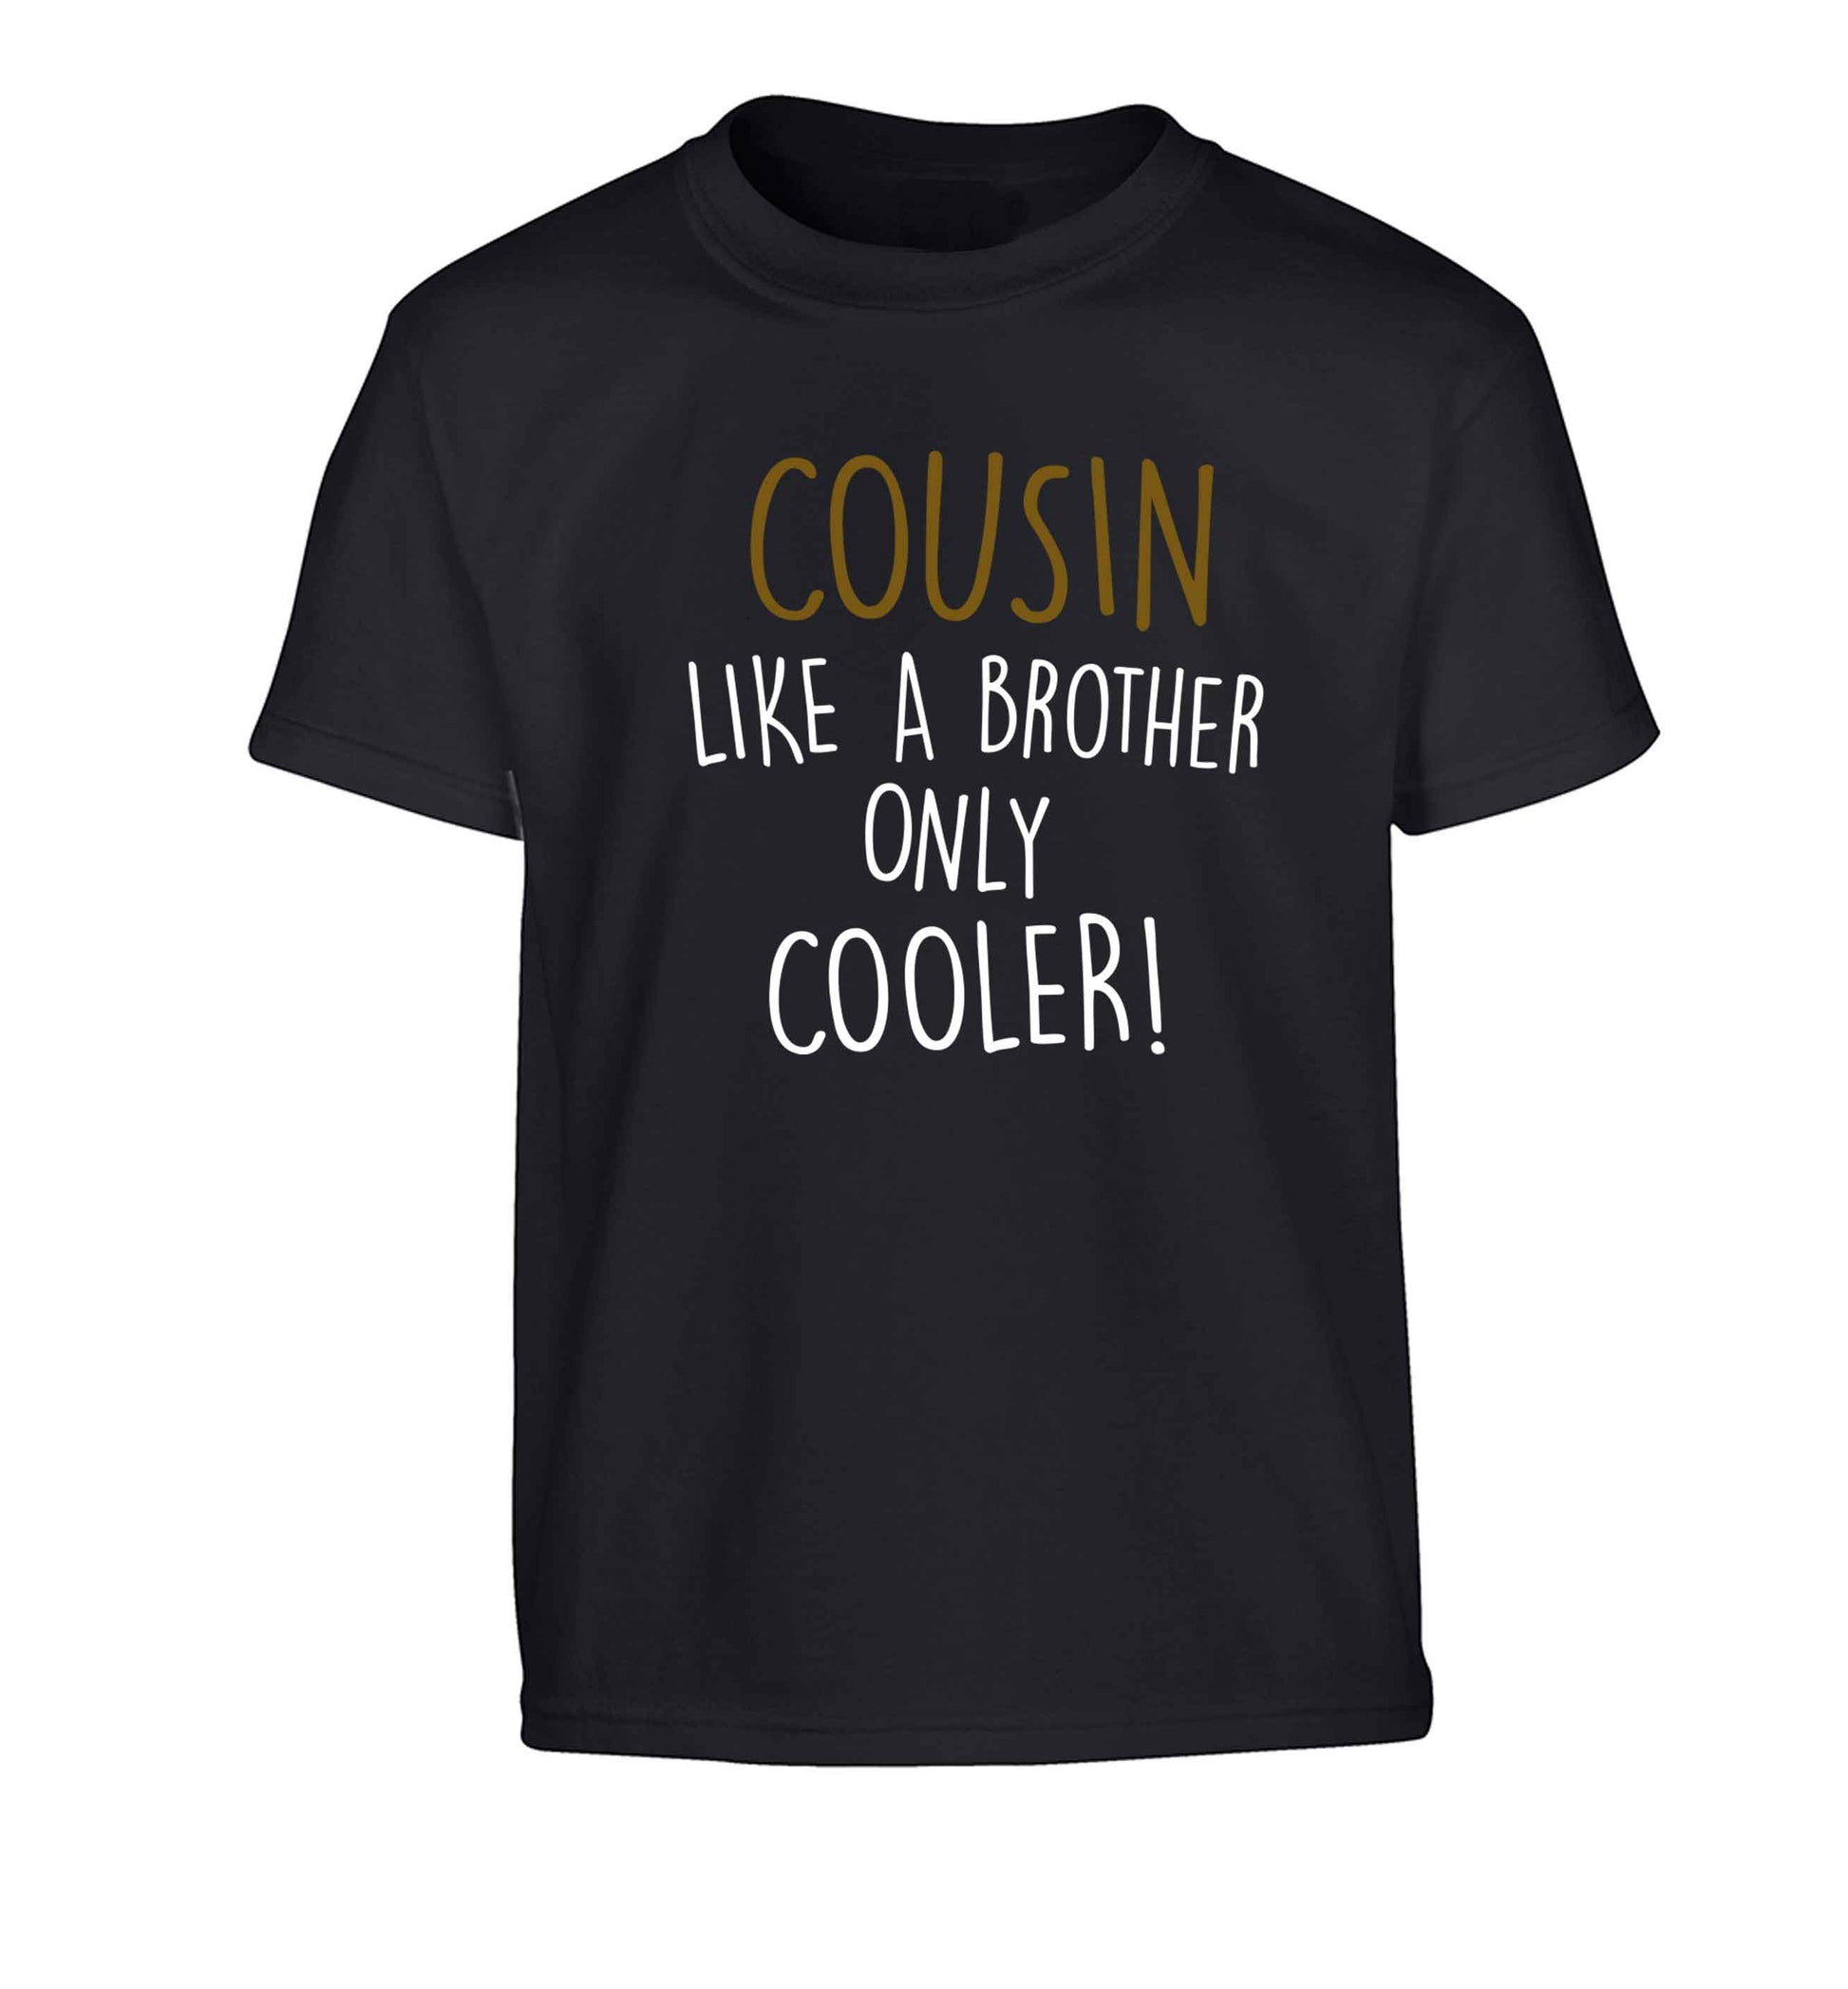 Cousin like a brother only cooler Children's black Tshirt 12-13 Years